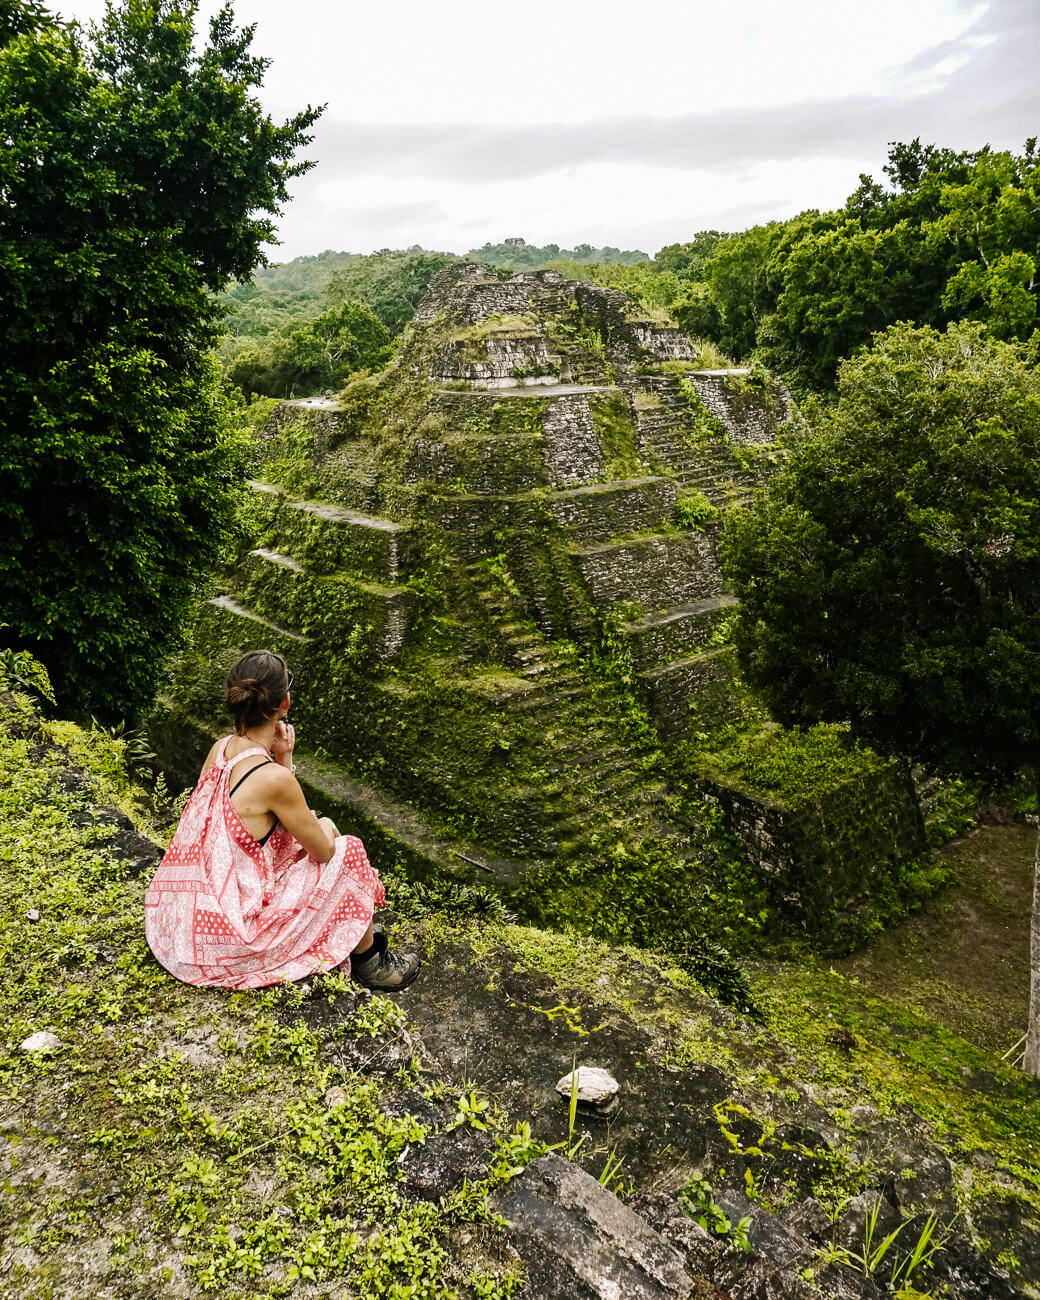 The archaeological site of Yaxhá is one of the best cultural things to do in Guatemala.